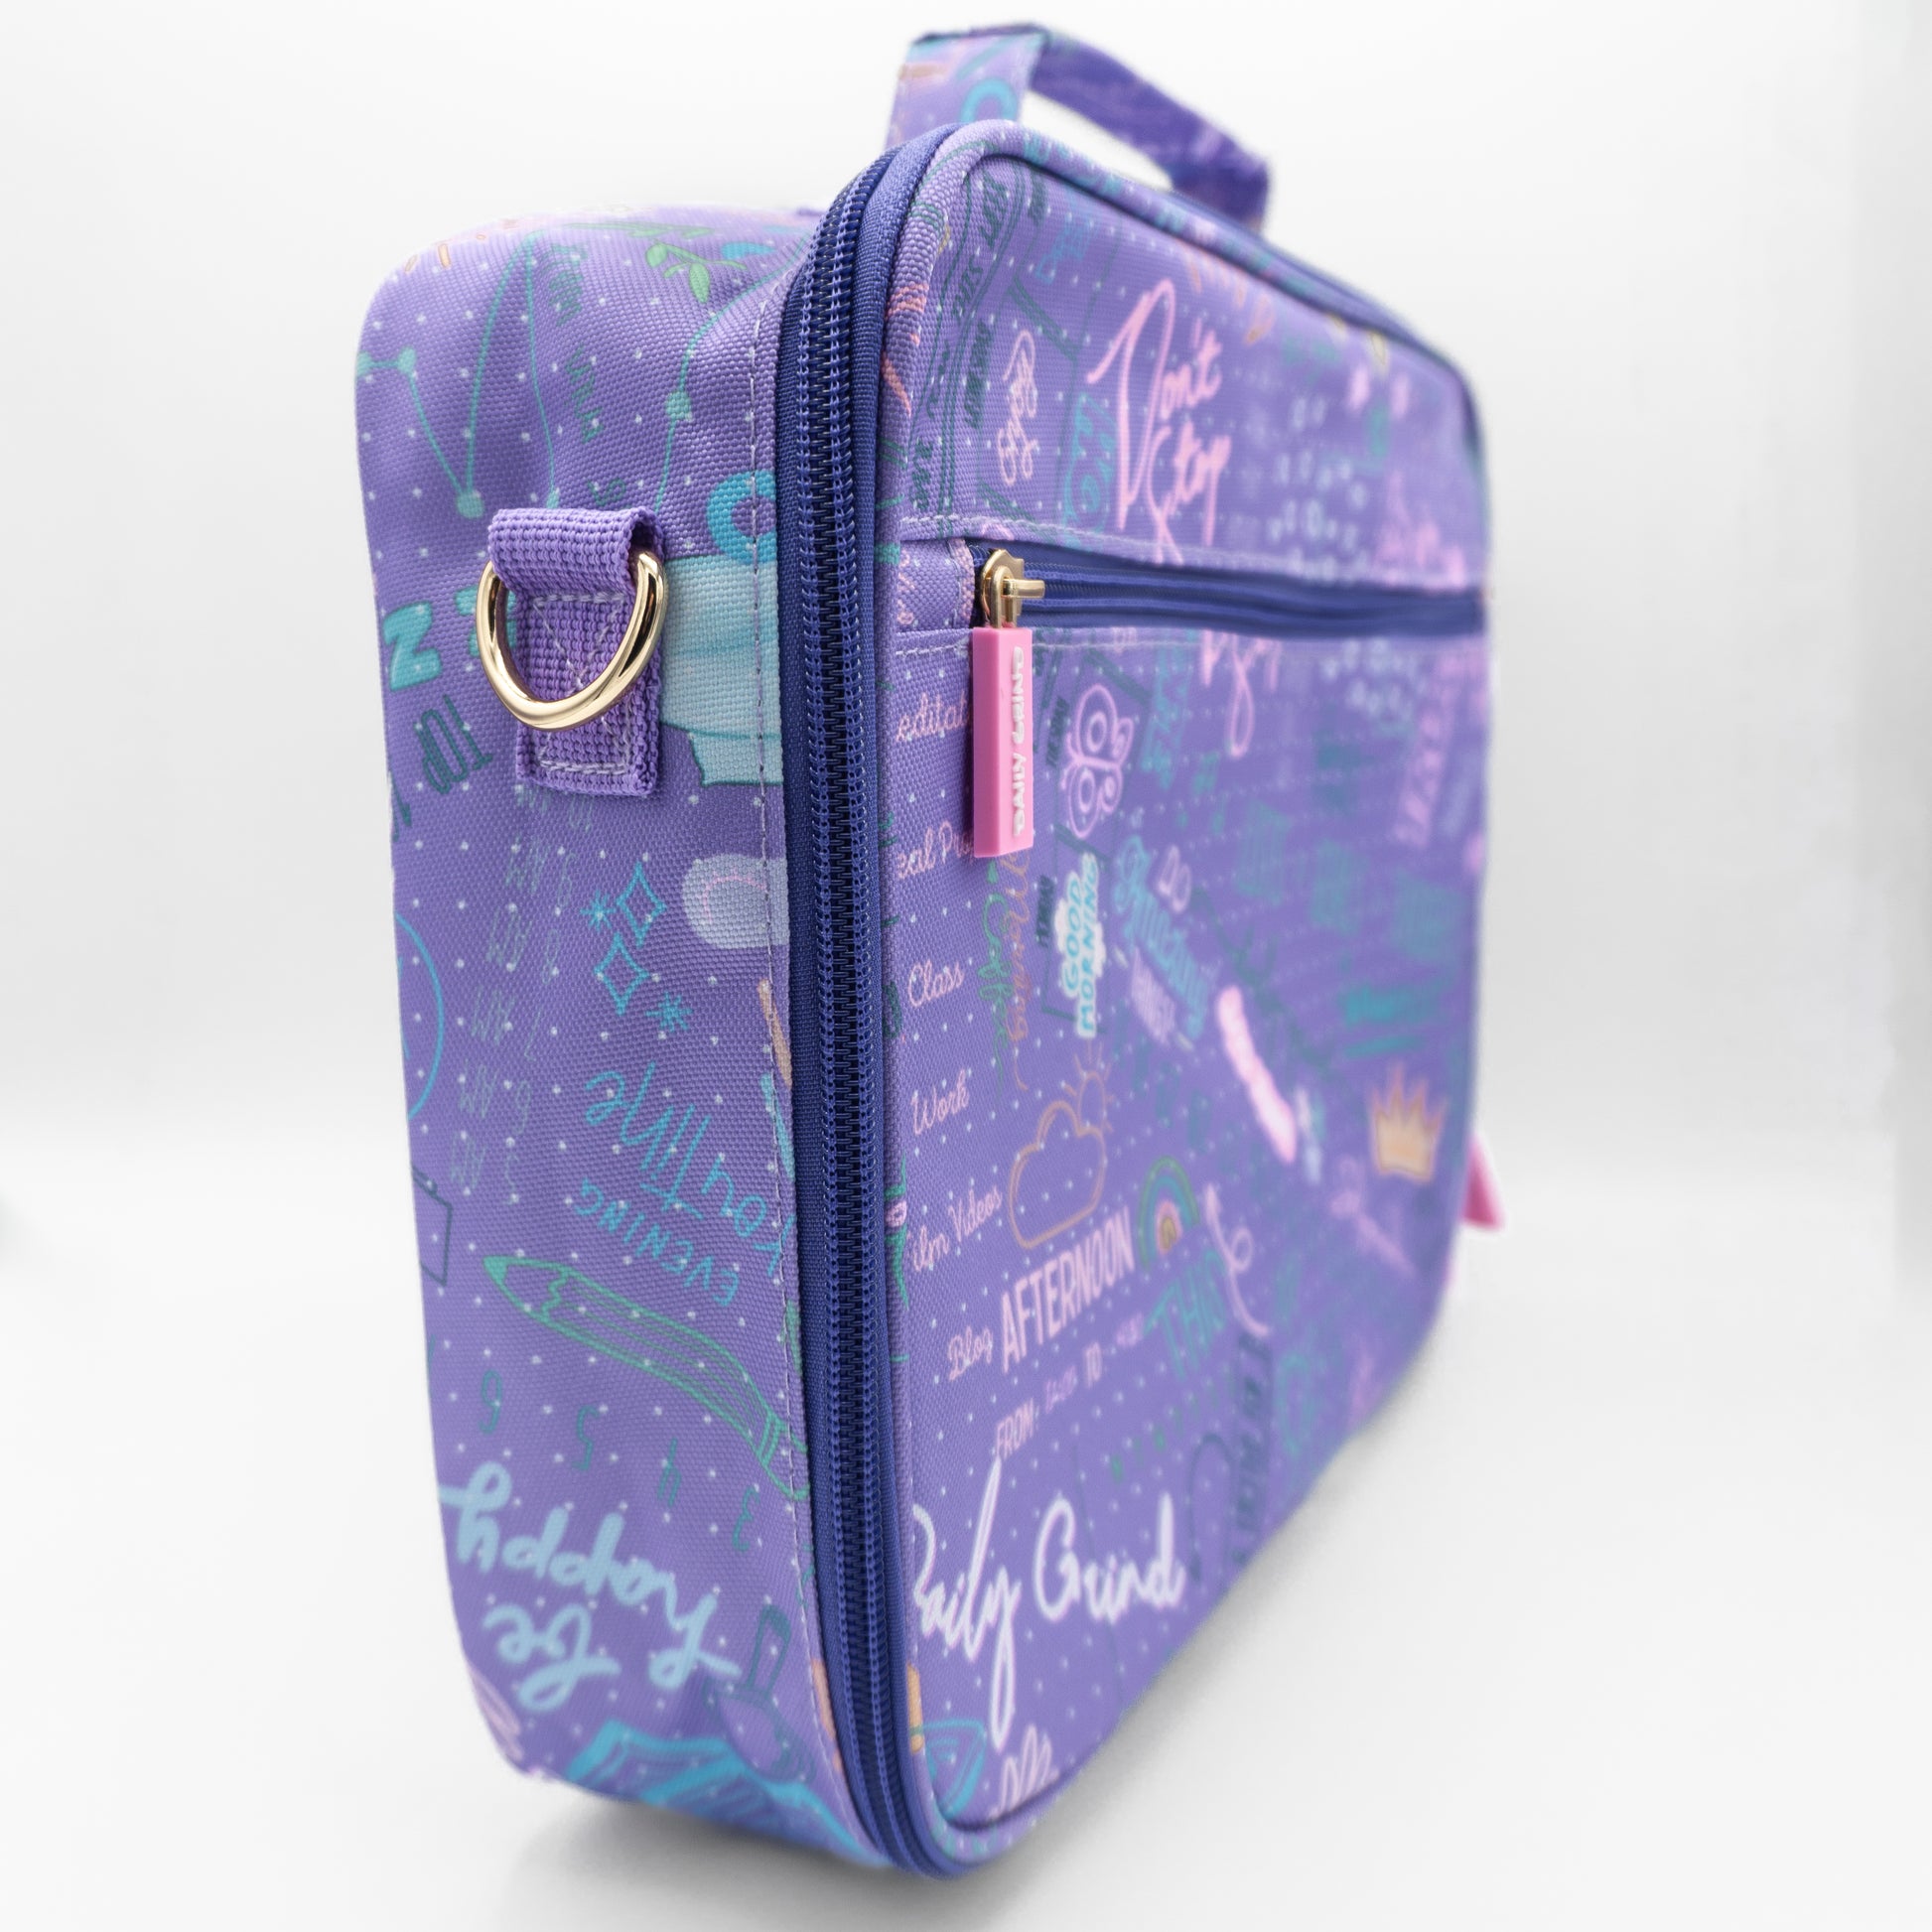 Side view of purple travel planner case